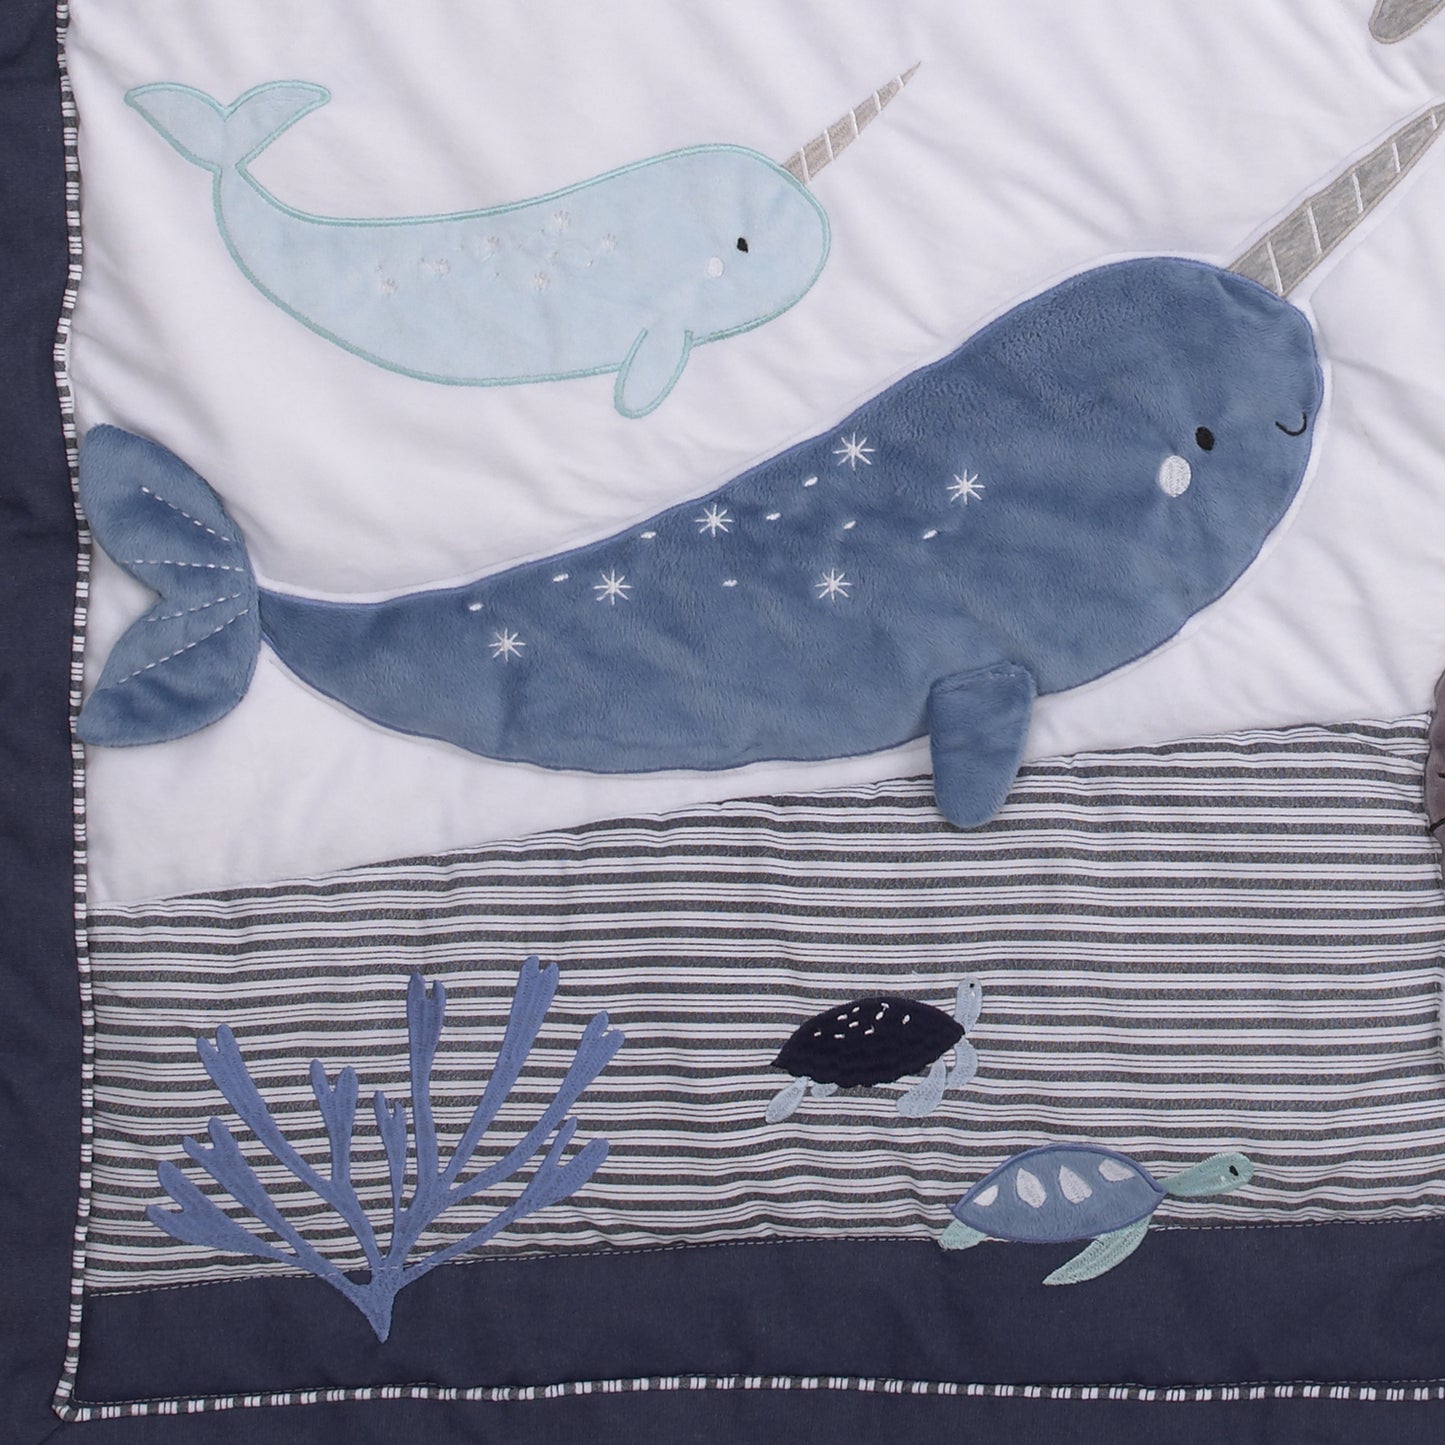 NoJo Seas The Day Blue and White Whale, Narwhal, Sea Lion, Shark 4 Piece Crib Bedding Set - Comforter, 100% Cotton Fitted Crib Sheet, Crib Skirt, and Storage